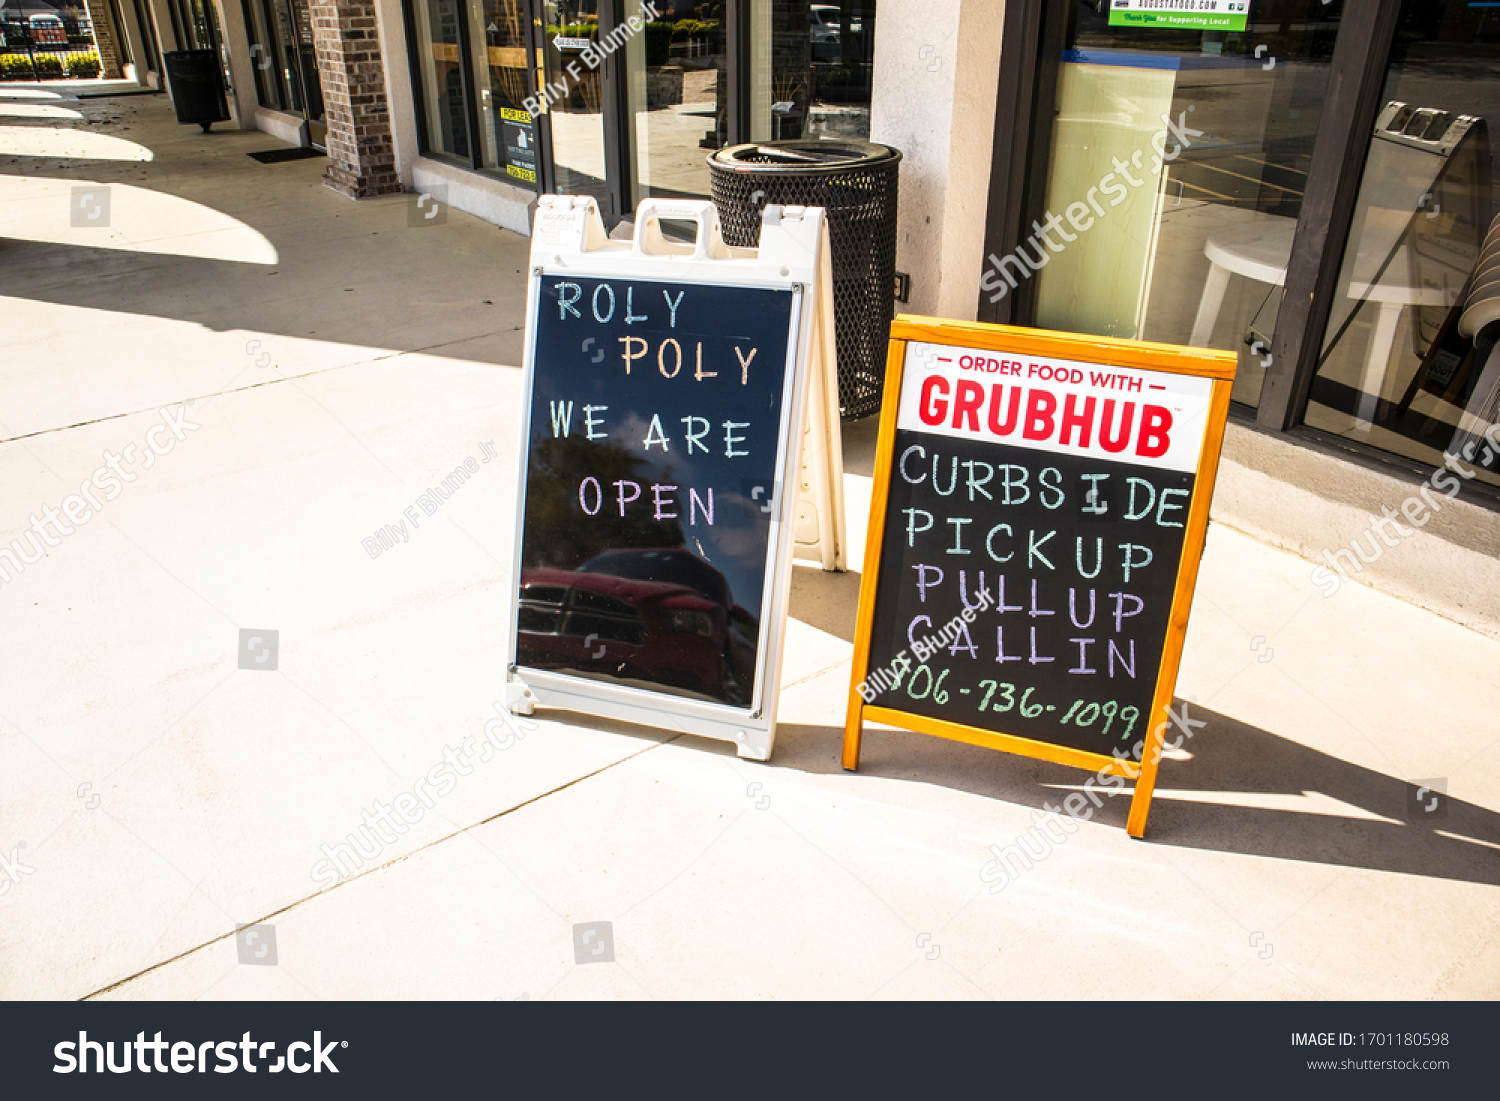 Augusta, Ga USA April 1 2020: Roly Poly sandwich restaurant signs open during pandemic #1701180598